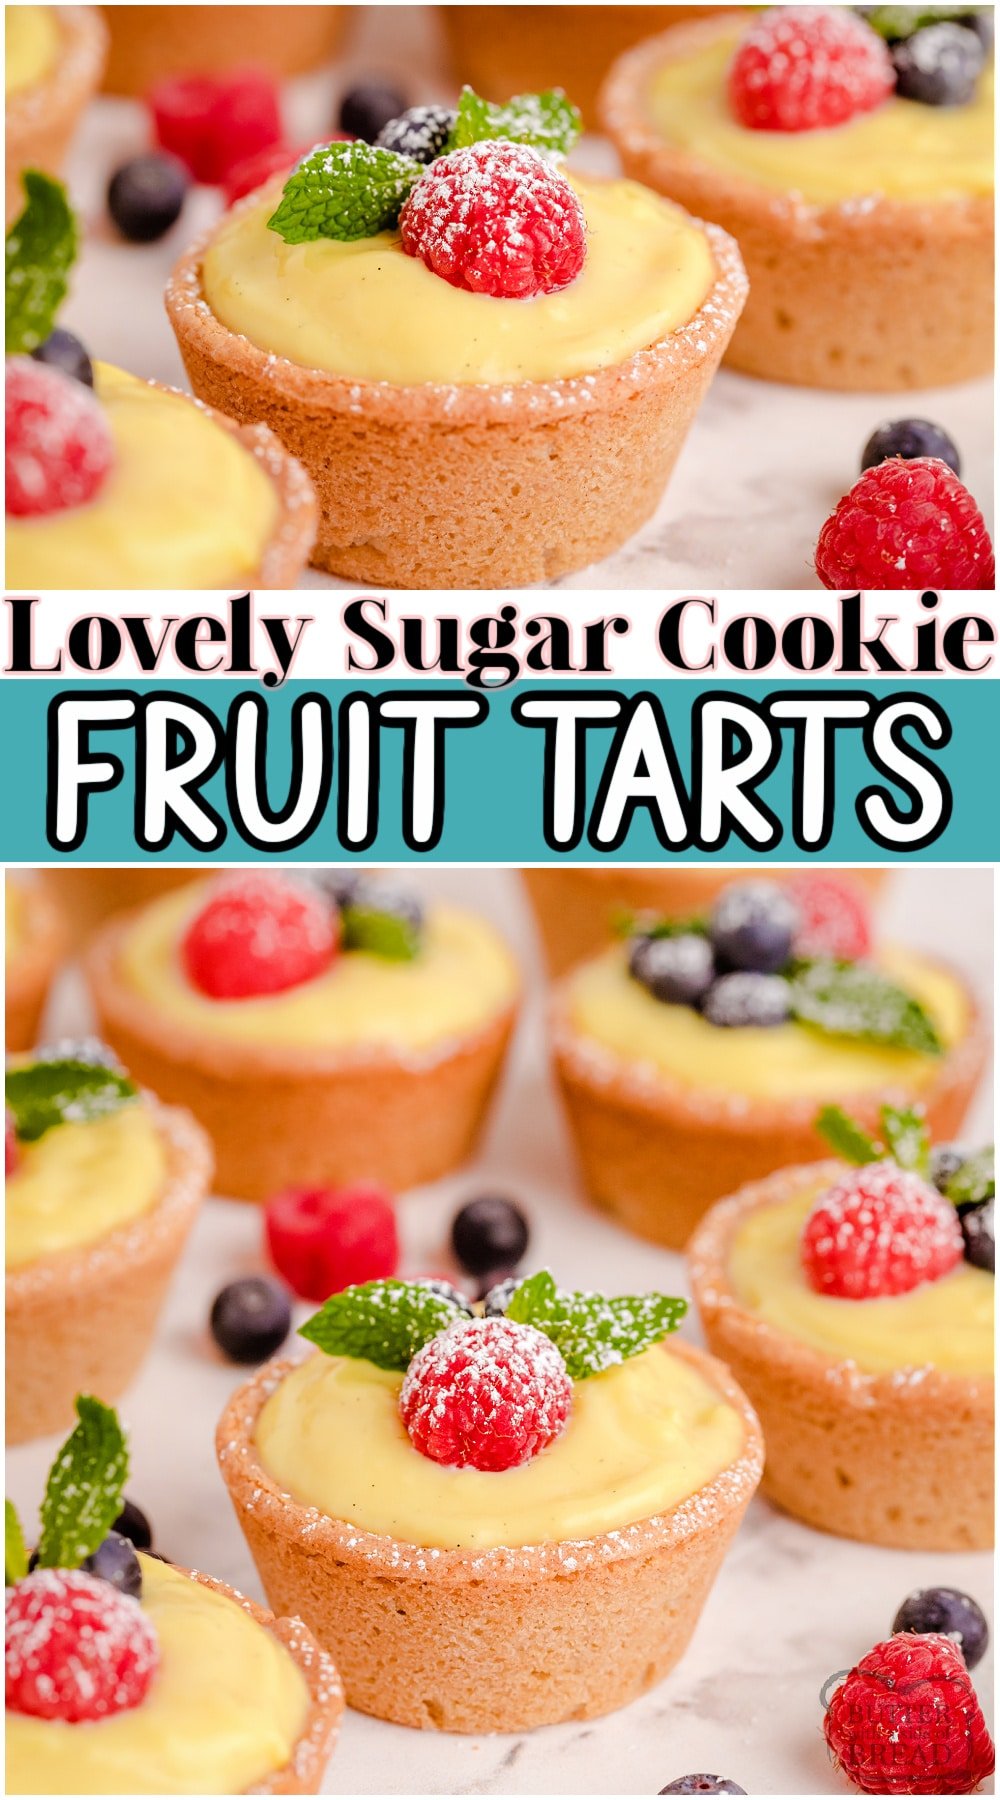 Mini summer Fruit Tarts are lovely sugar cookie cups filled with vanilla custard & topped with your favorite fruit! They're a perfect dessert for fresh berries. Sugar Cookie crust mini tarts perfect for Mother's Day or a Baby Shower!